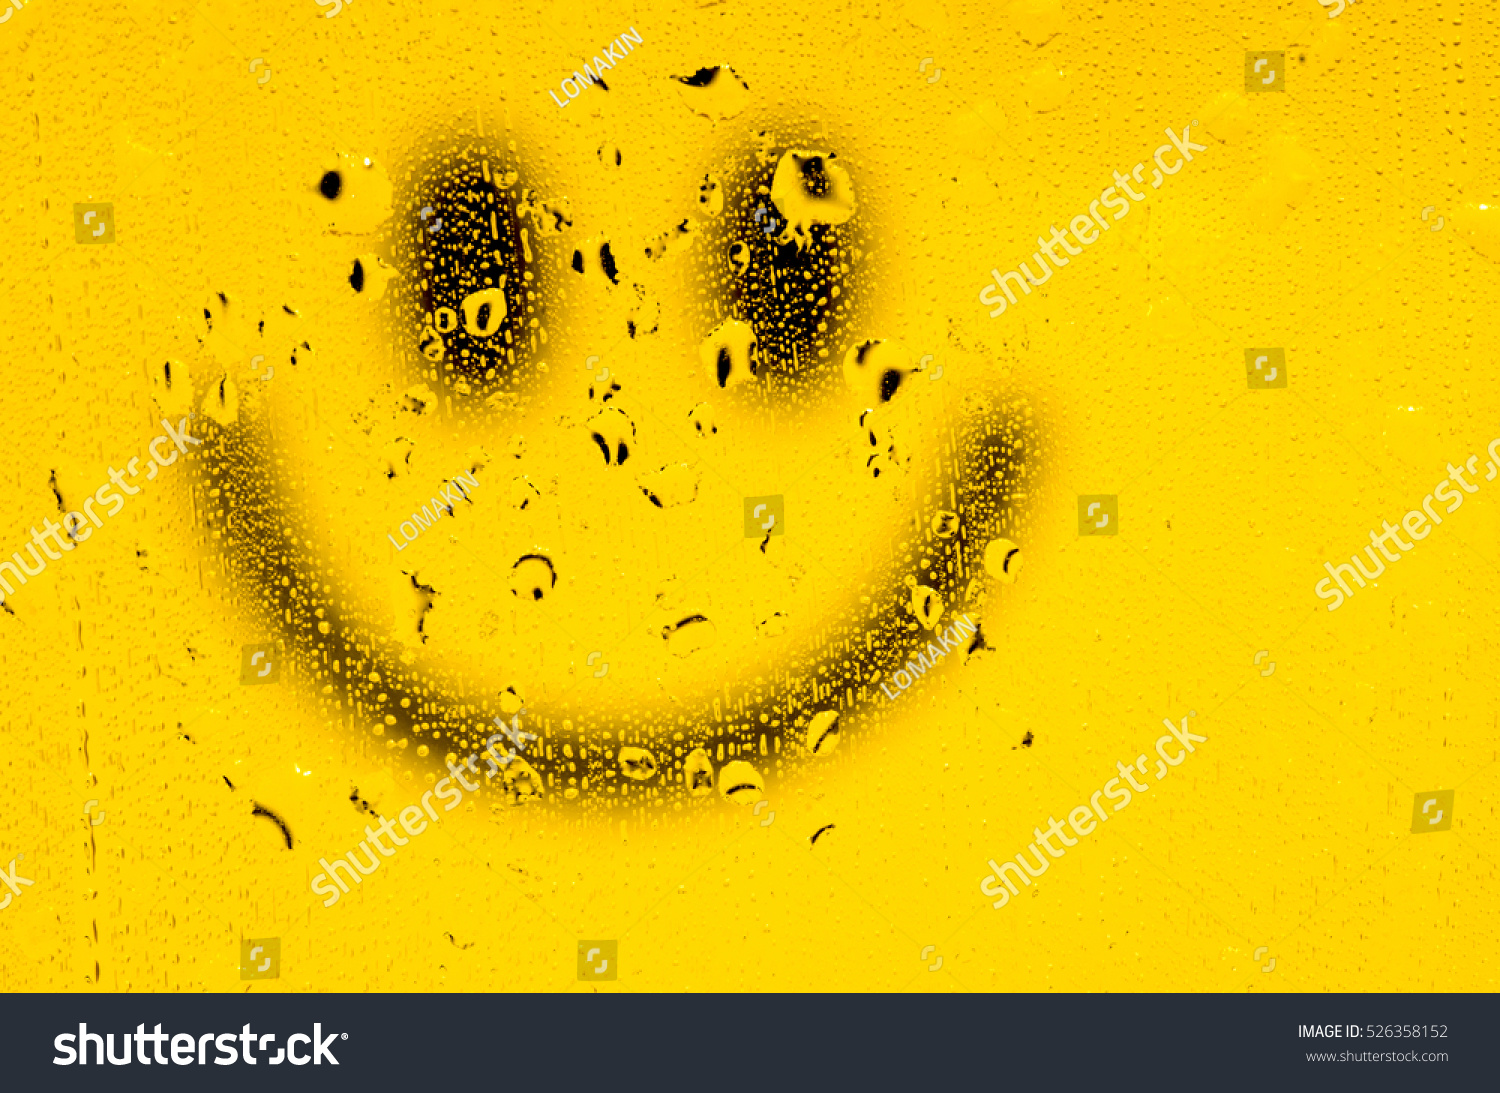 Smiley Face Yellow Smile Poster World Stock Photo Edit Now